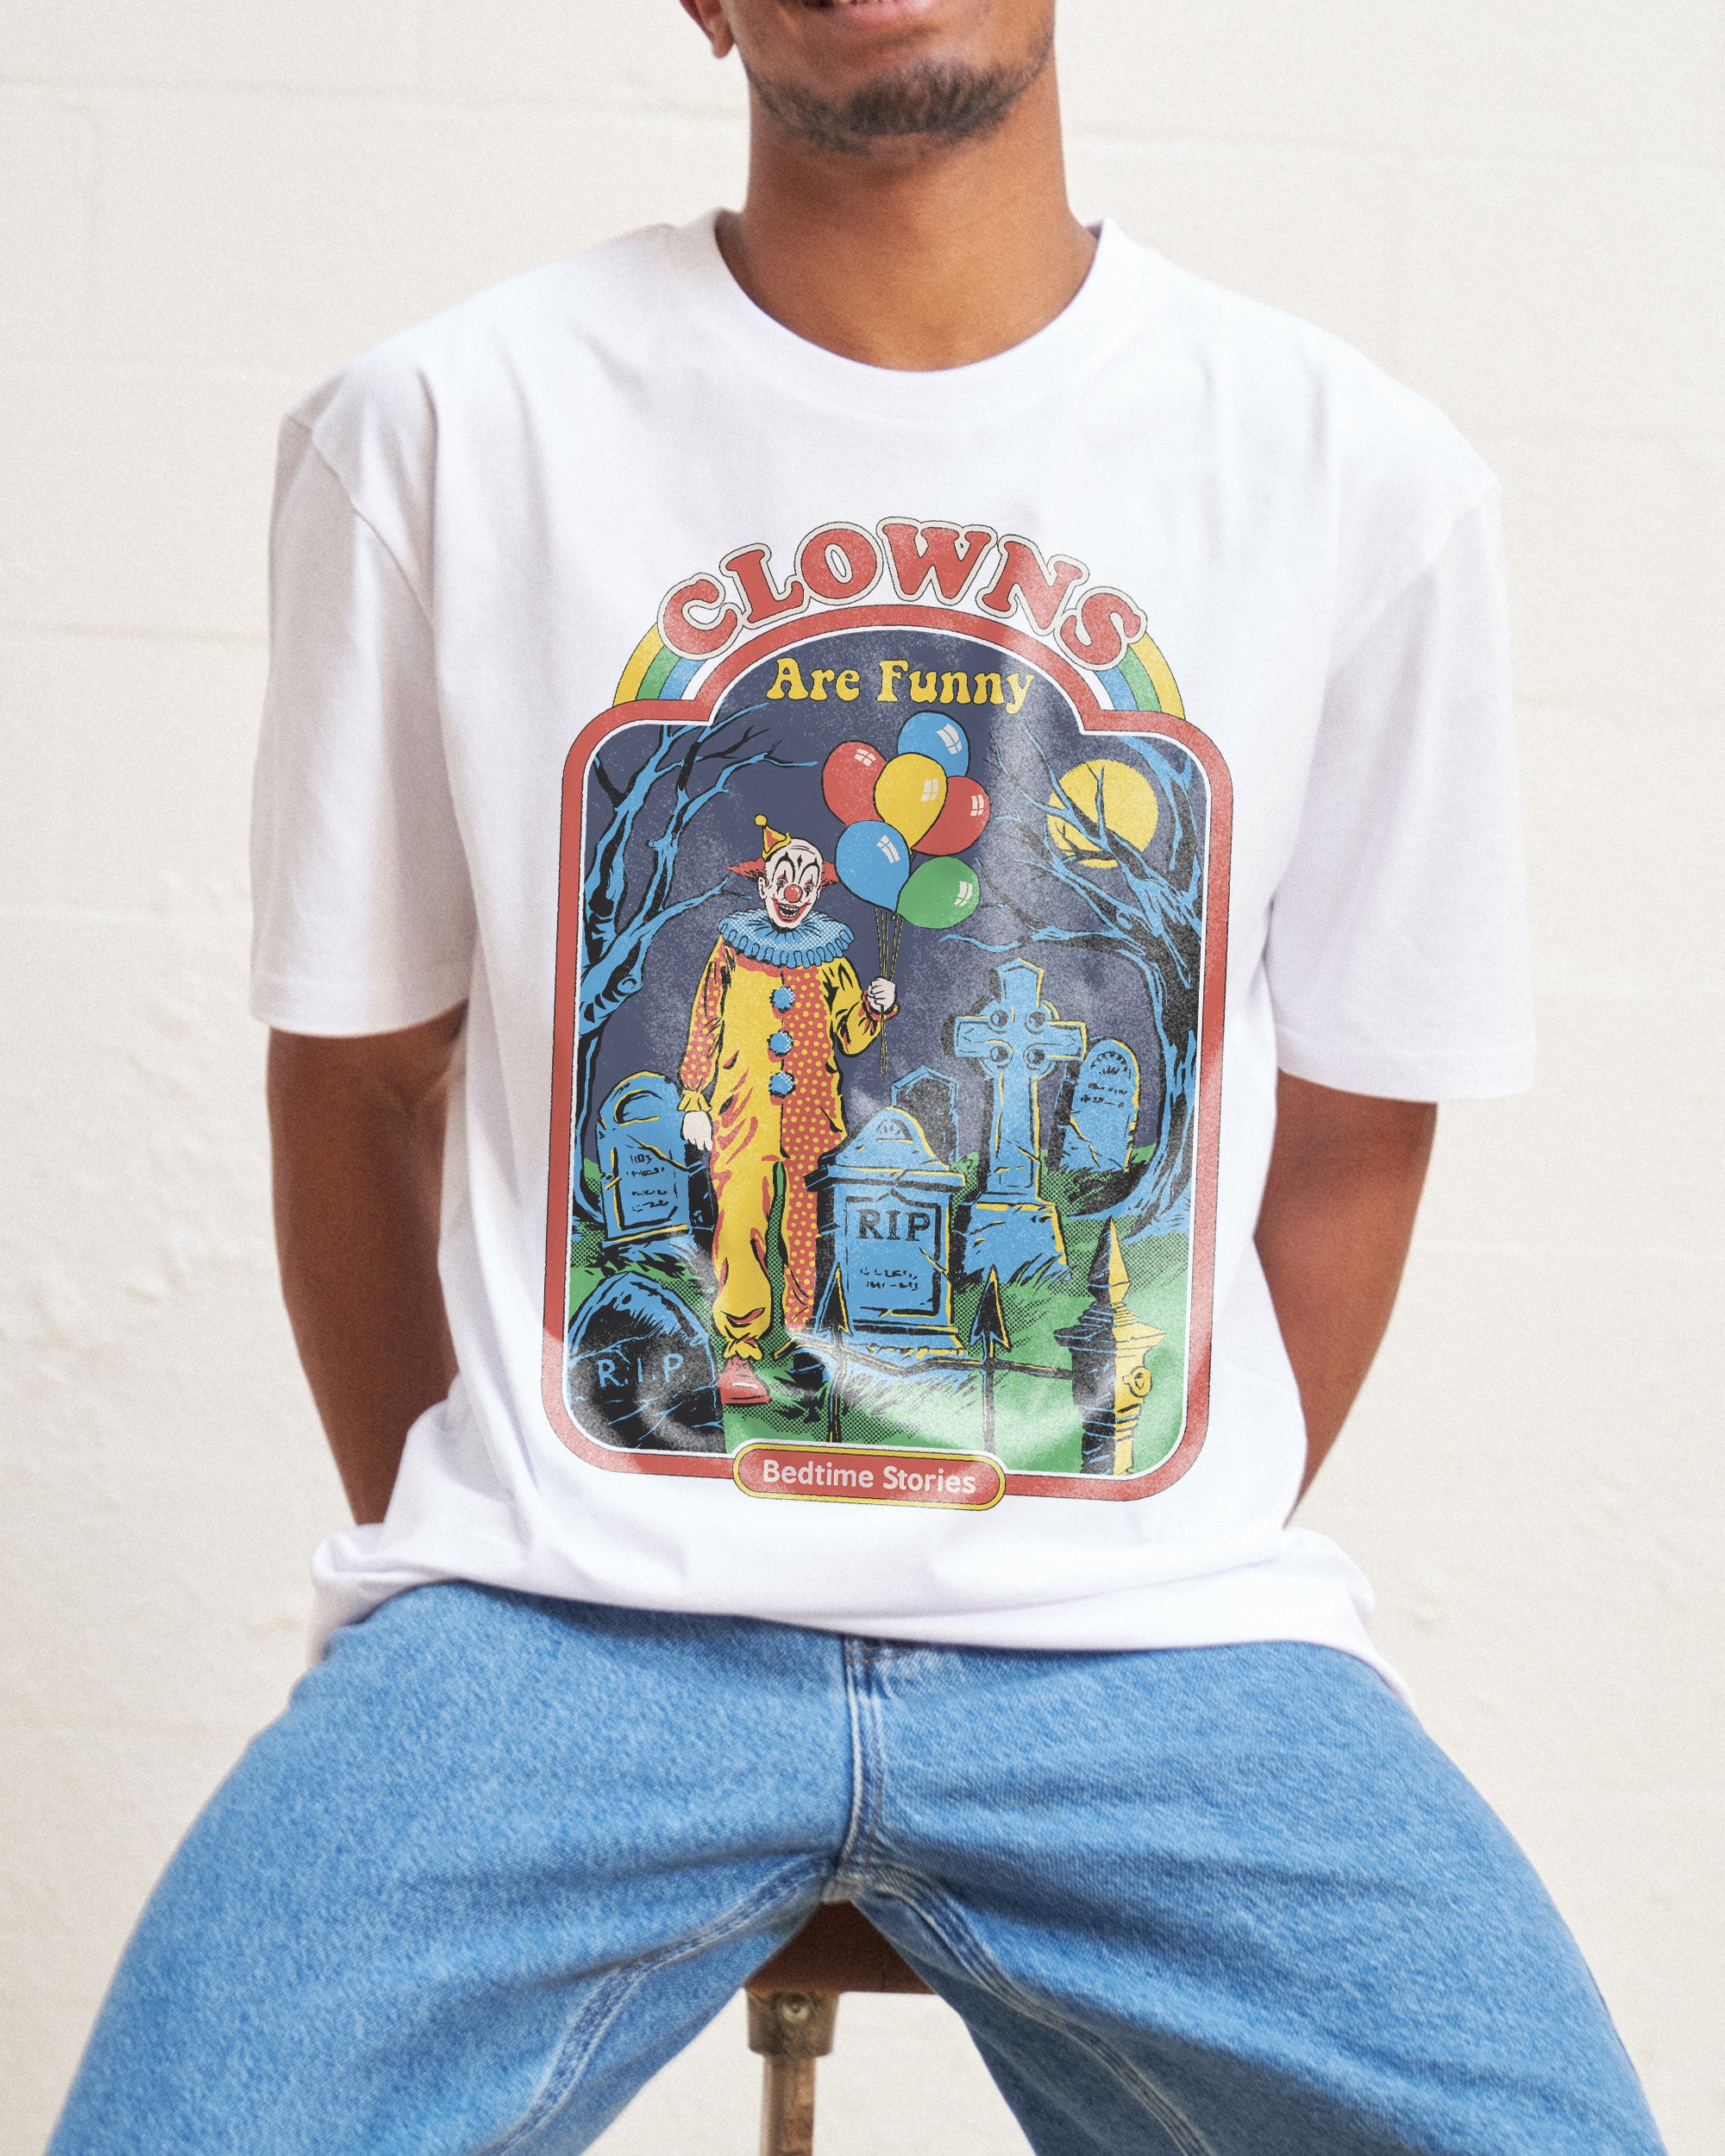 Clowns are Funny T-Shirt